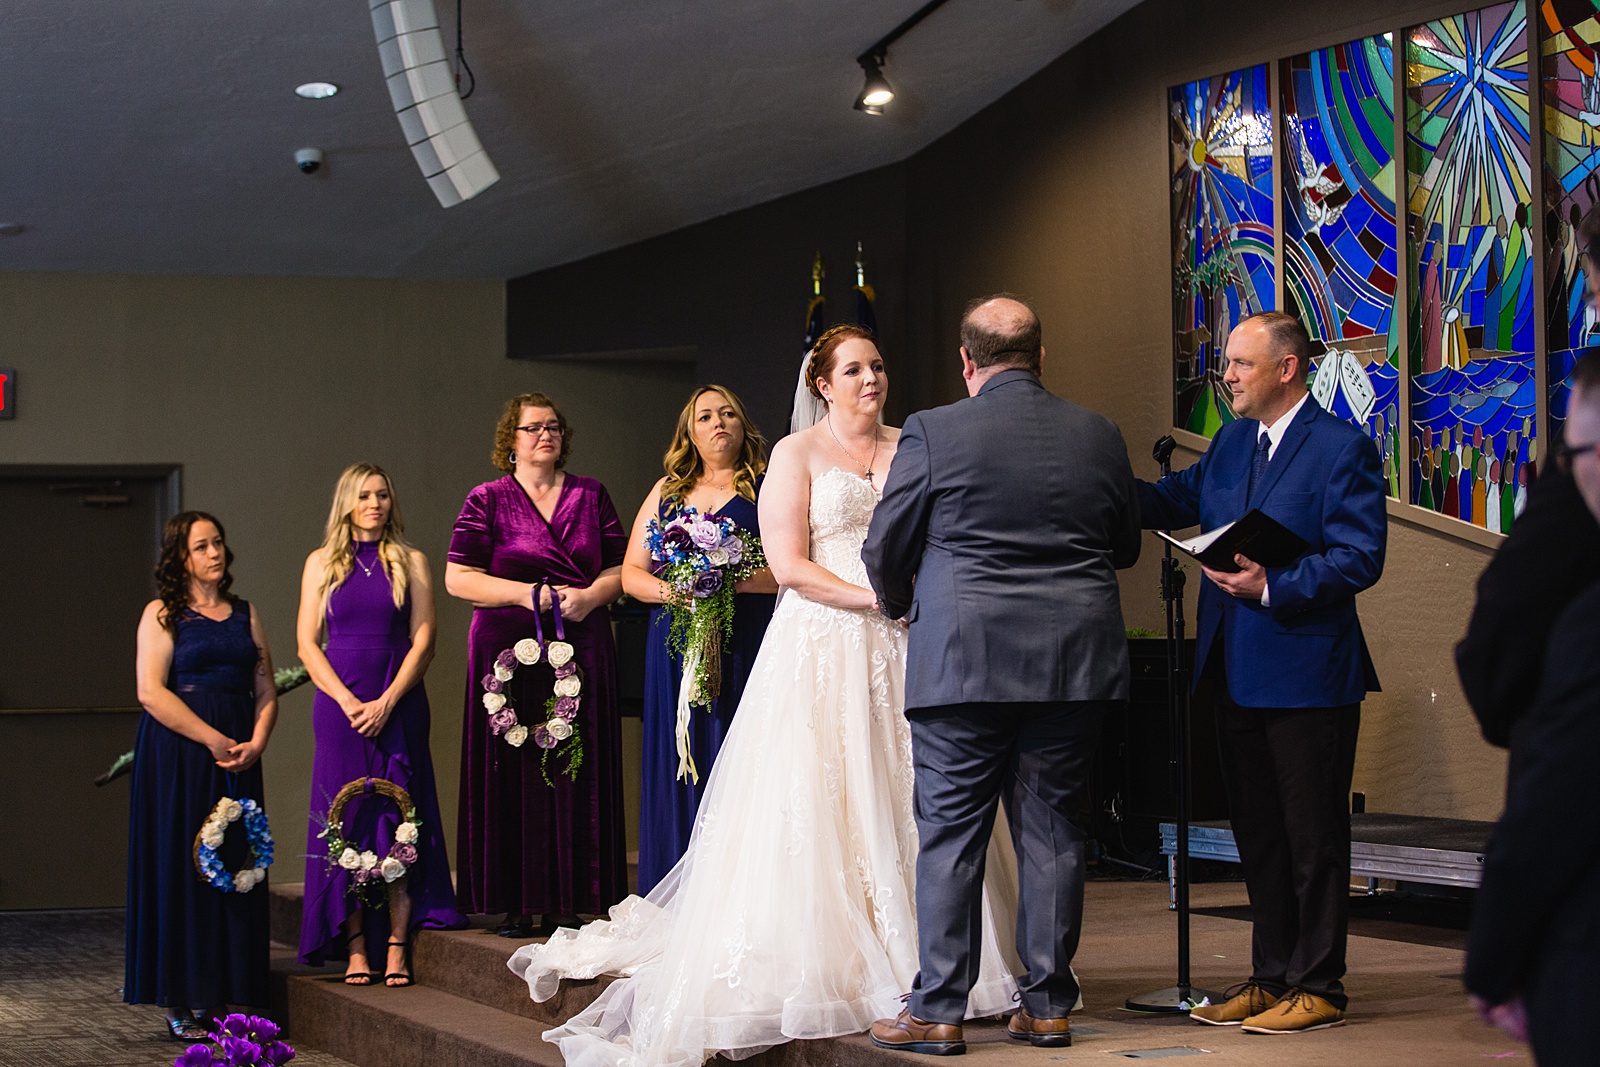 Bride looking at her groom during their wedding ceremony at Sun Valley Church by Tempe wedding photographer PMA Photography.